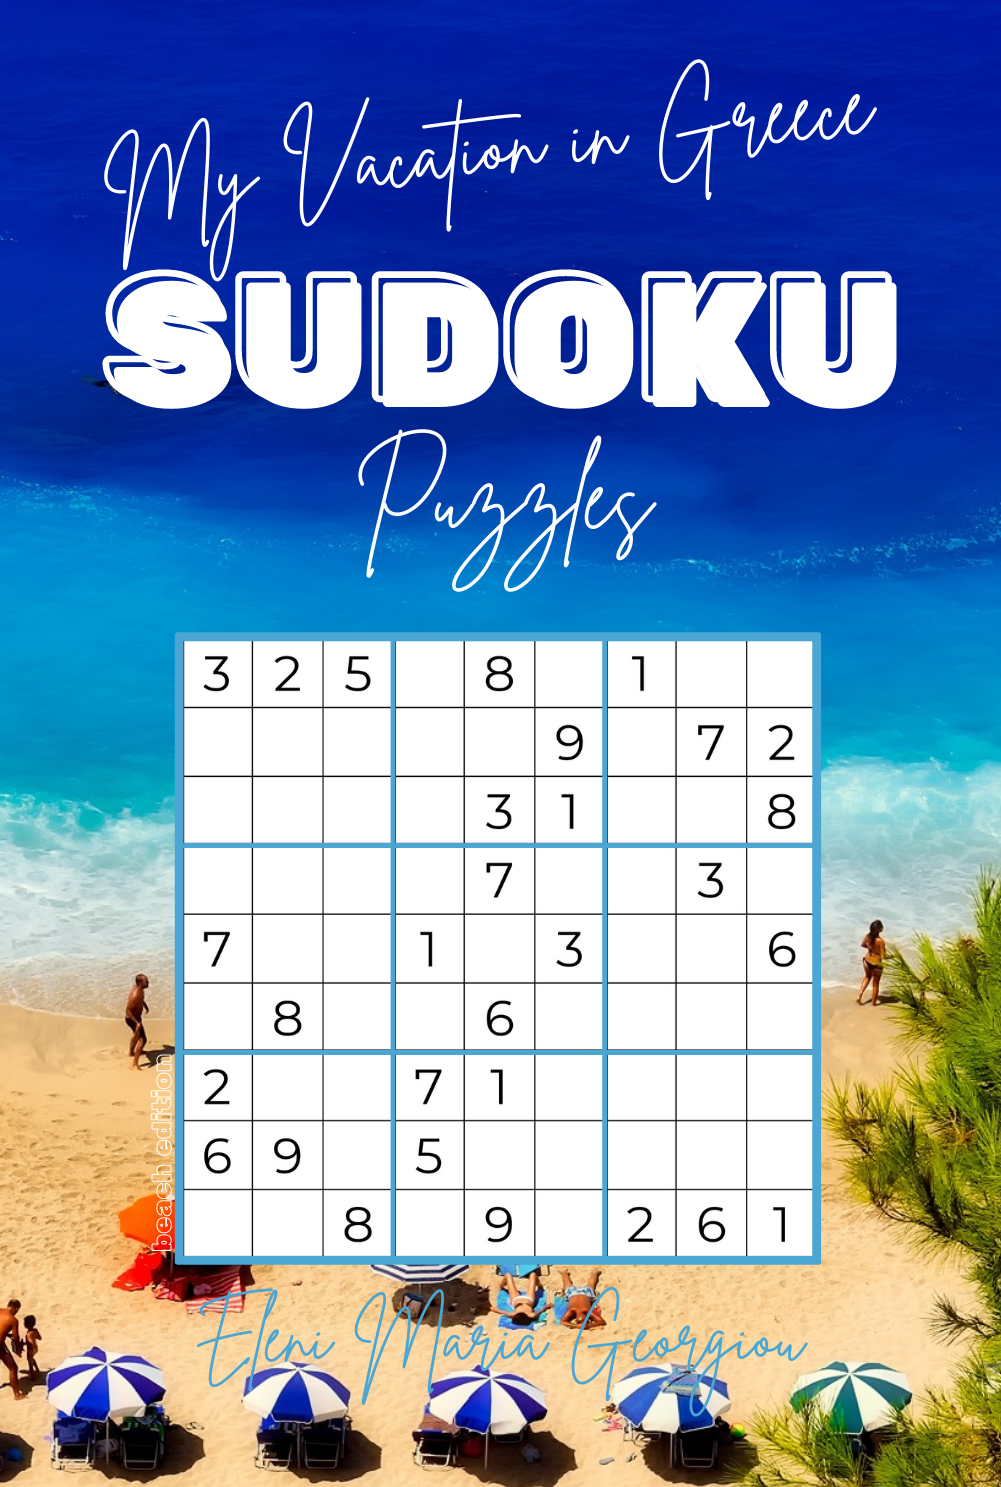 My Vacation in Greece SUDOKU Puzzles: Beach Edition